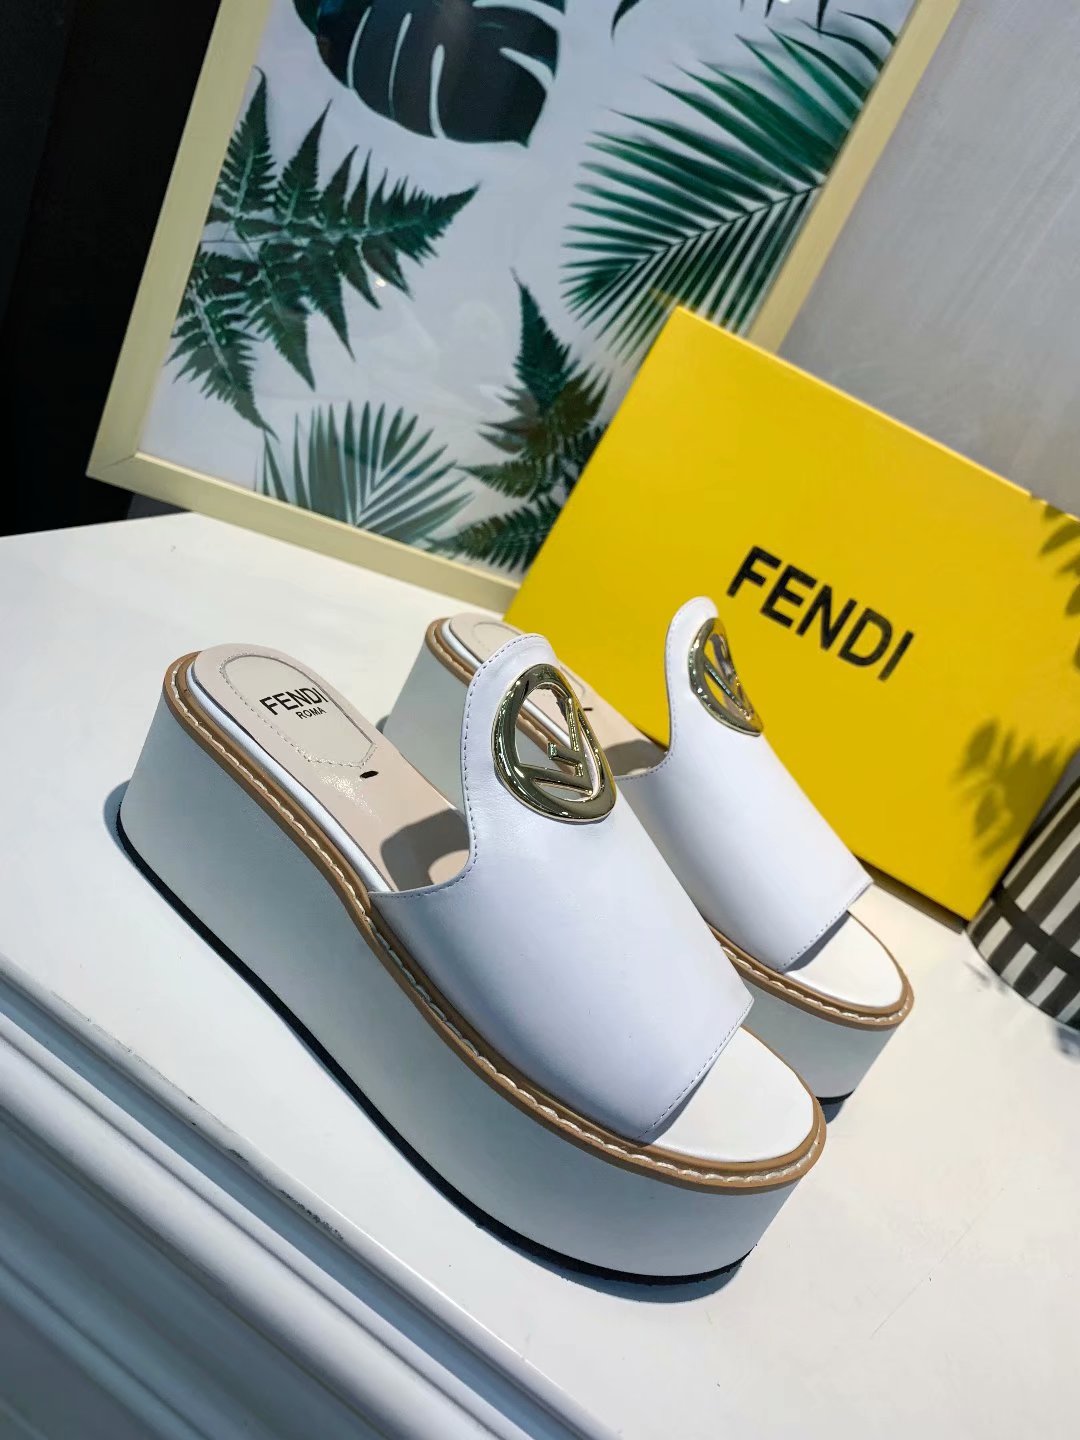 Fendi classic casual home beach sandals for men women trendy slippers sandals Shoes